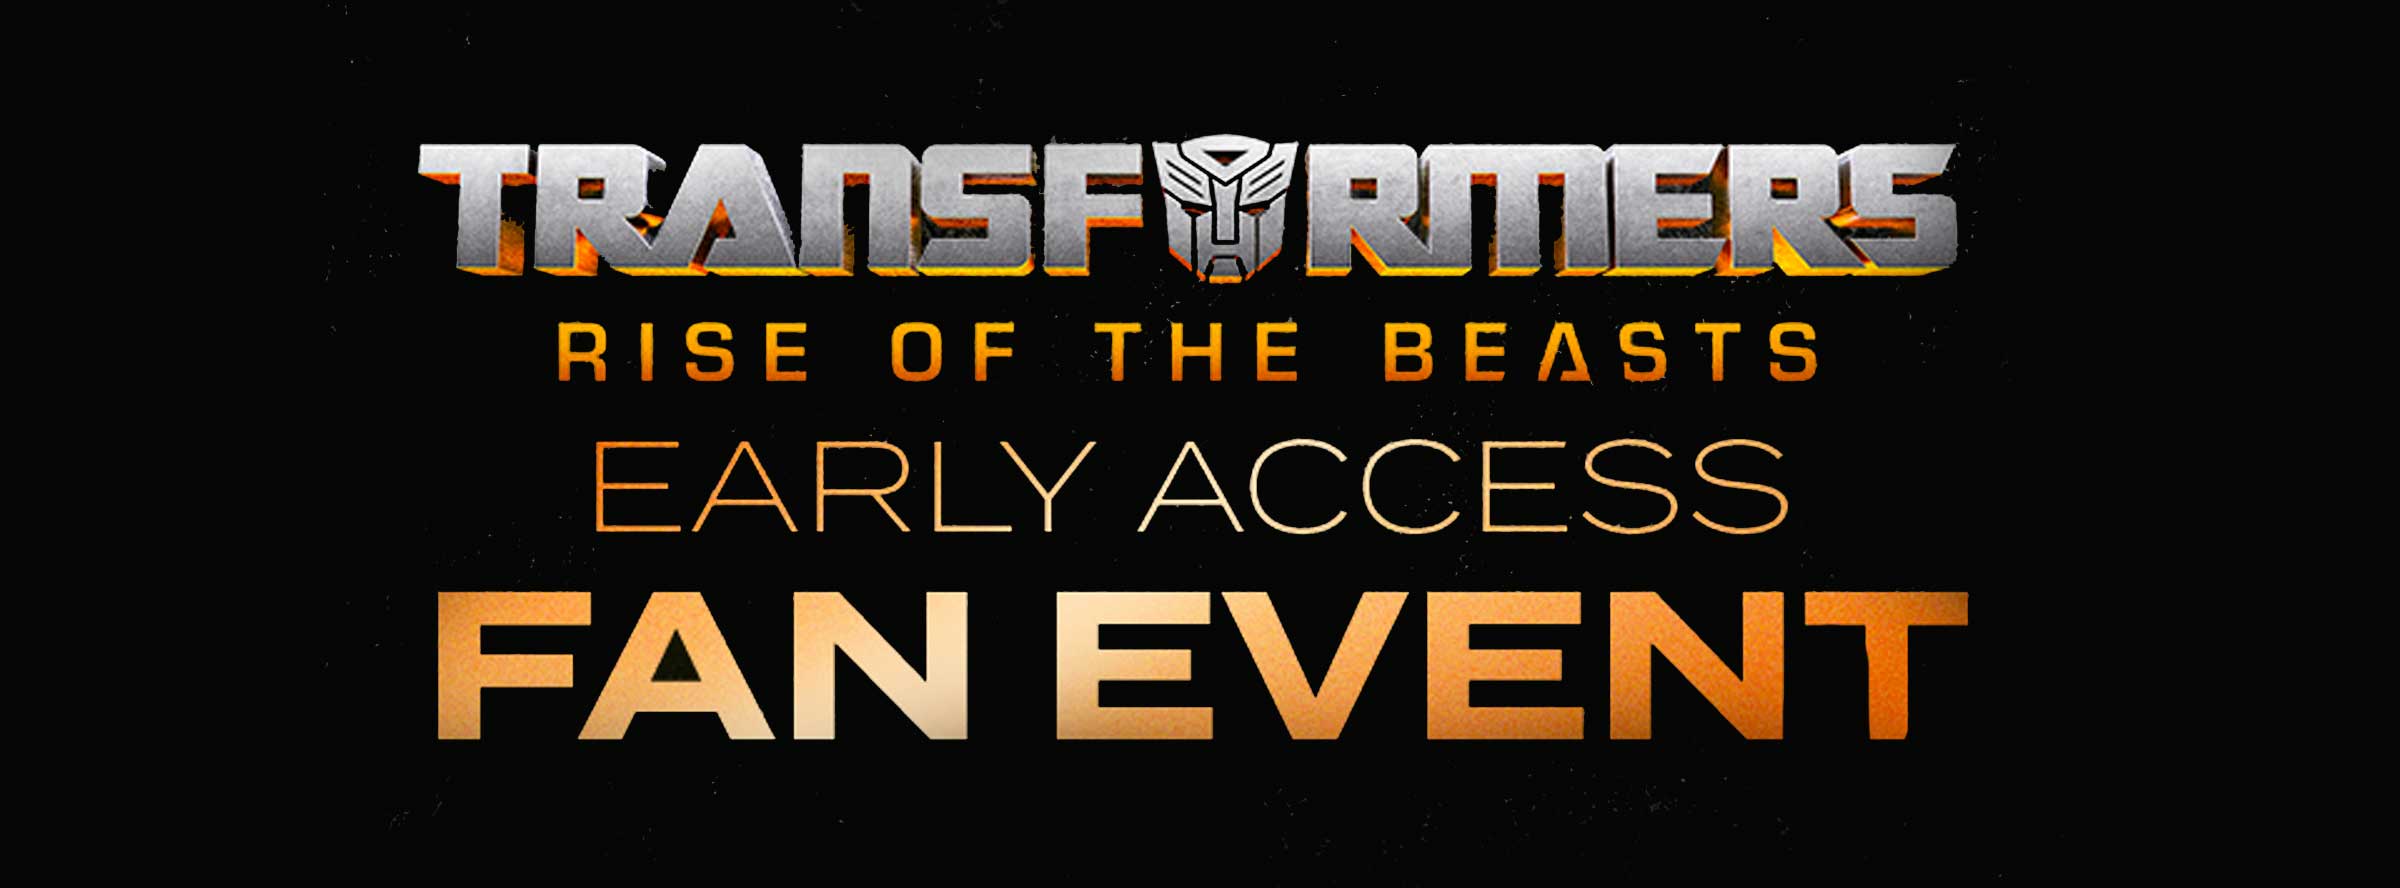 Slider Image for Transformers: Rise of the Beasts Early Access